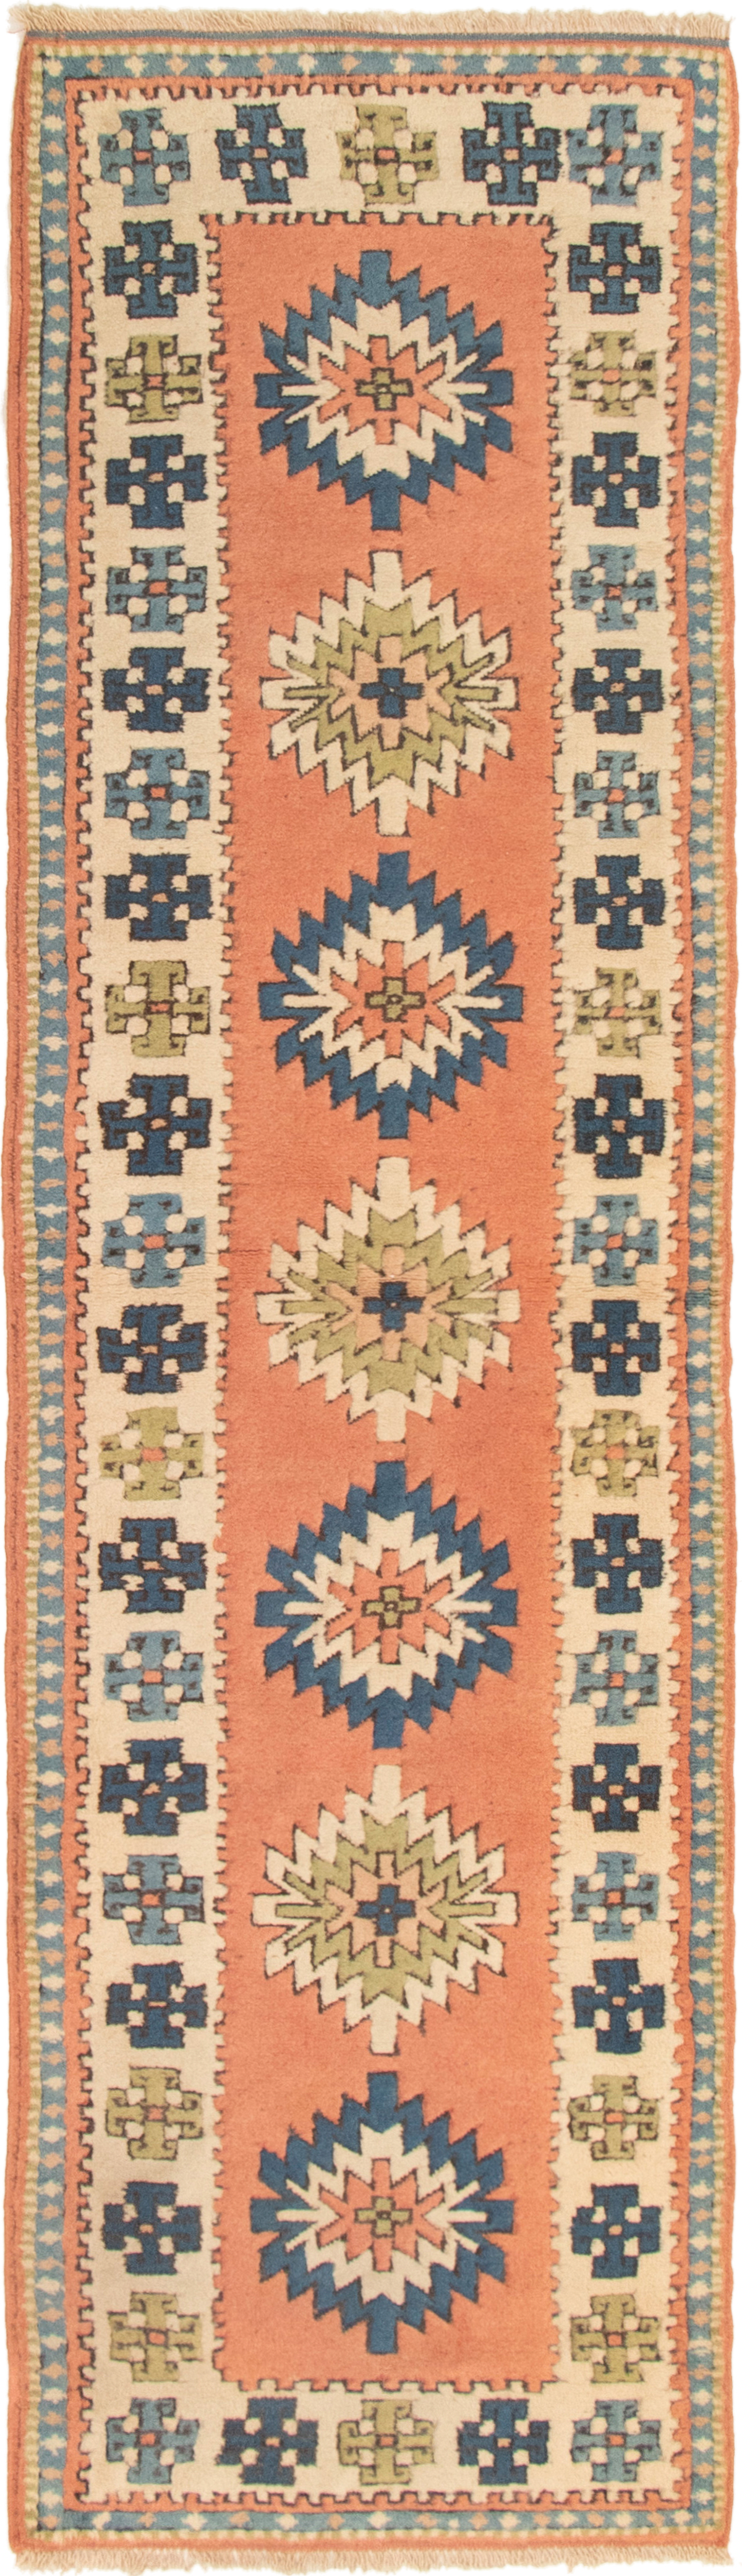 Hand-knotted Ushak Copper Wool Rug 2'8" x 9'5" Size: 2'8" x 9'5"  